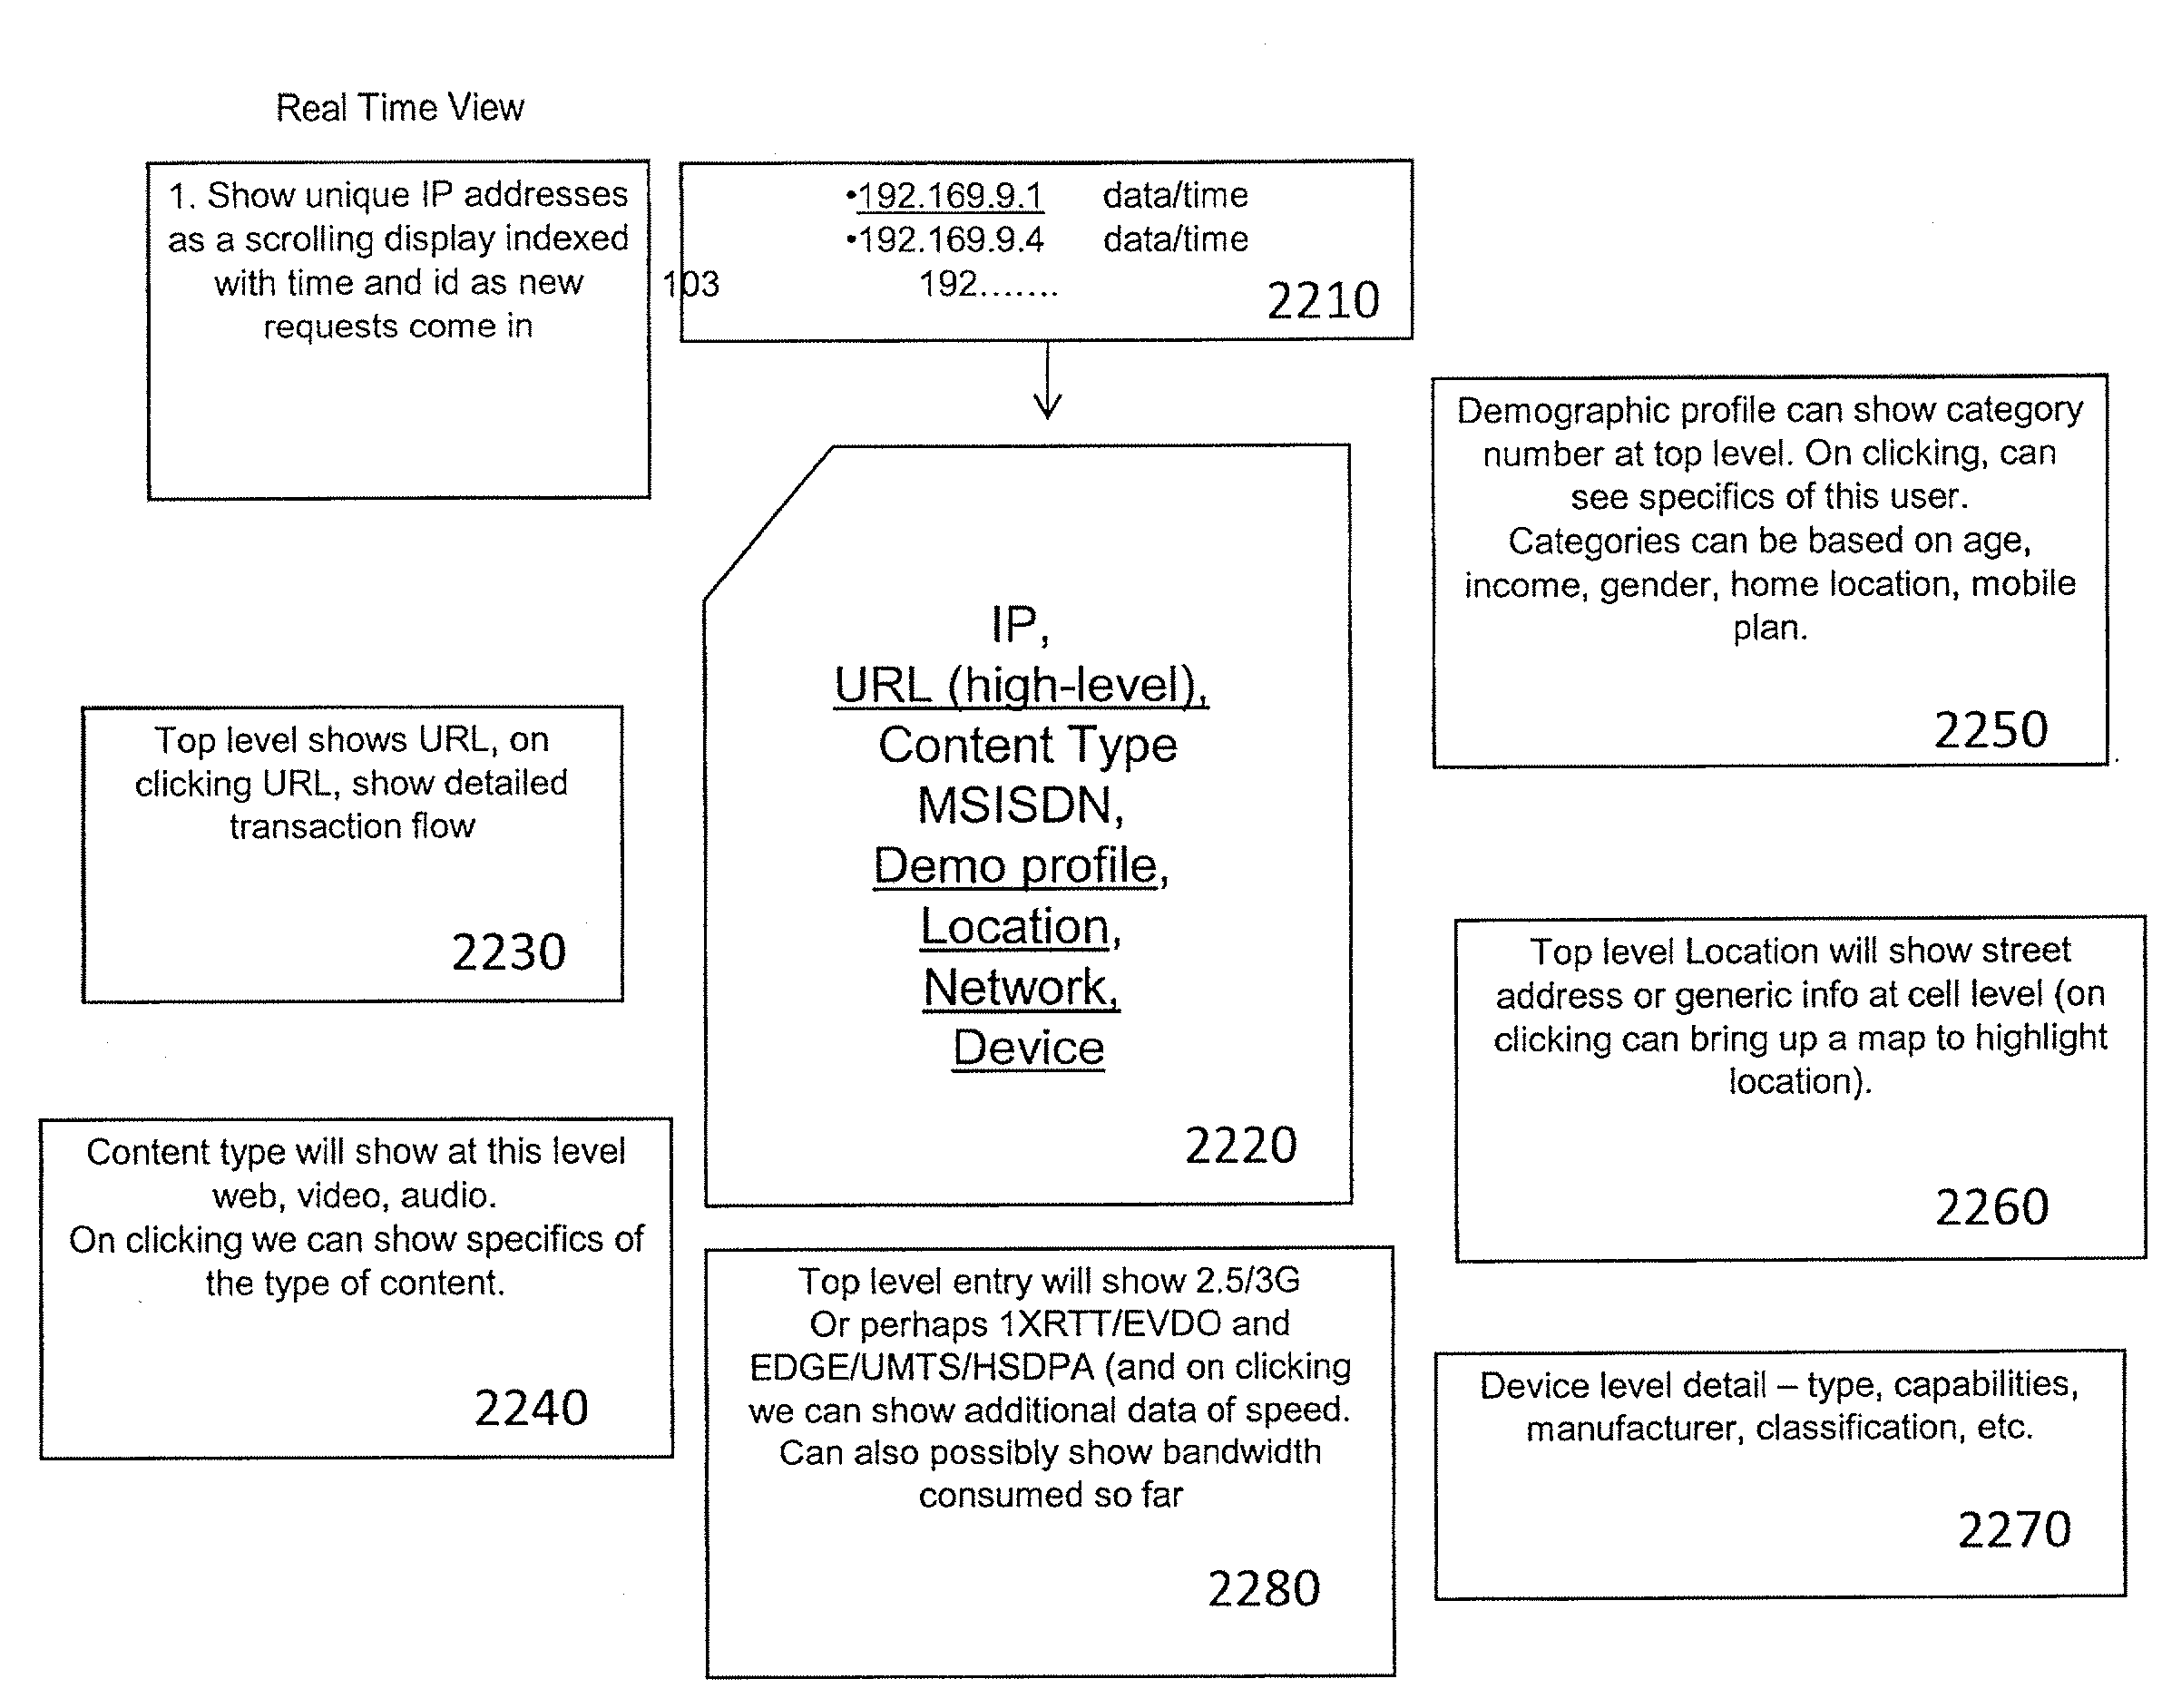 Method and apparatus for storing data on application-level activity and other user information to enable real-time multi-dimensional reporting about user of a mobile data network